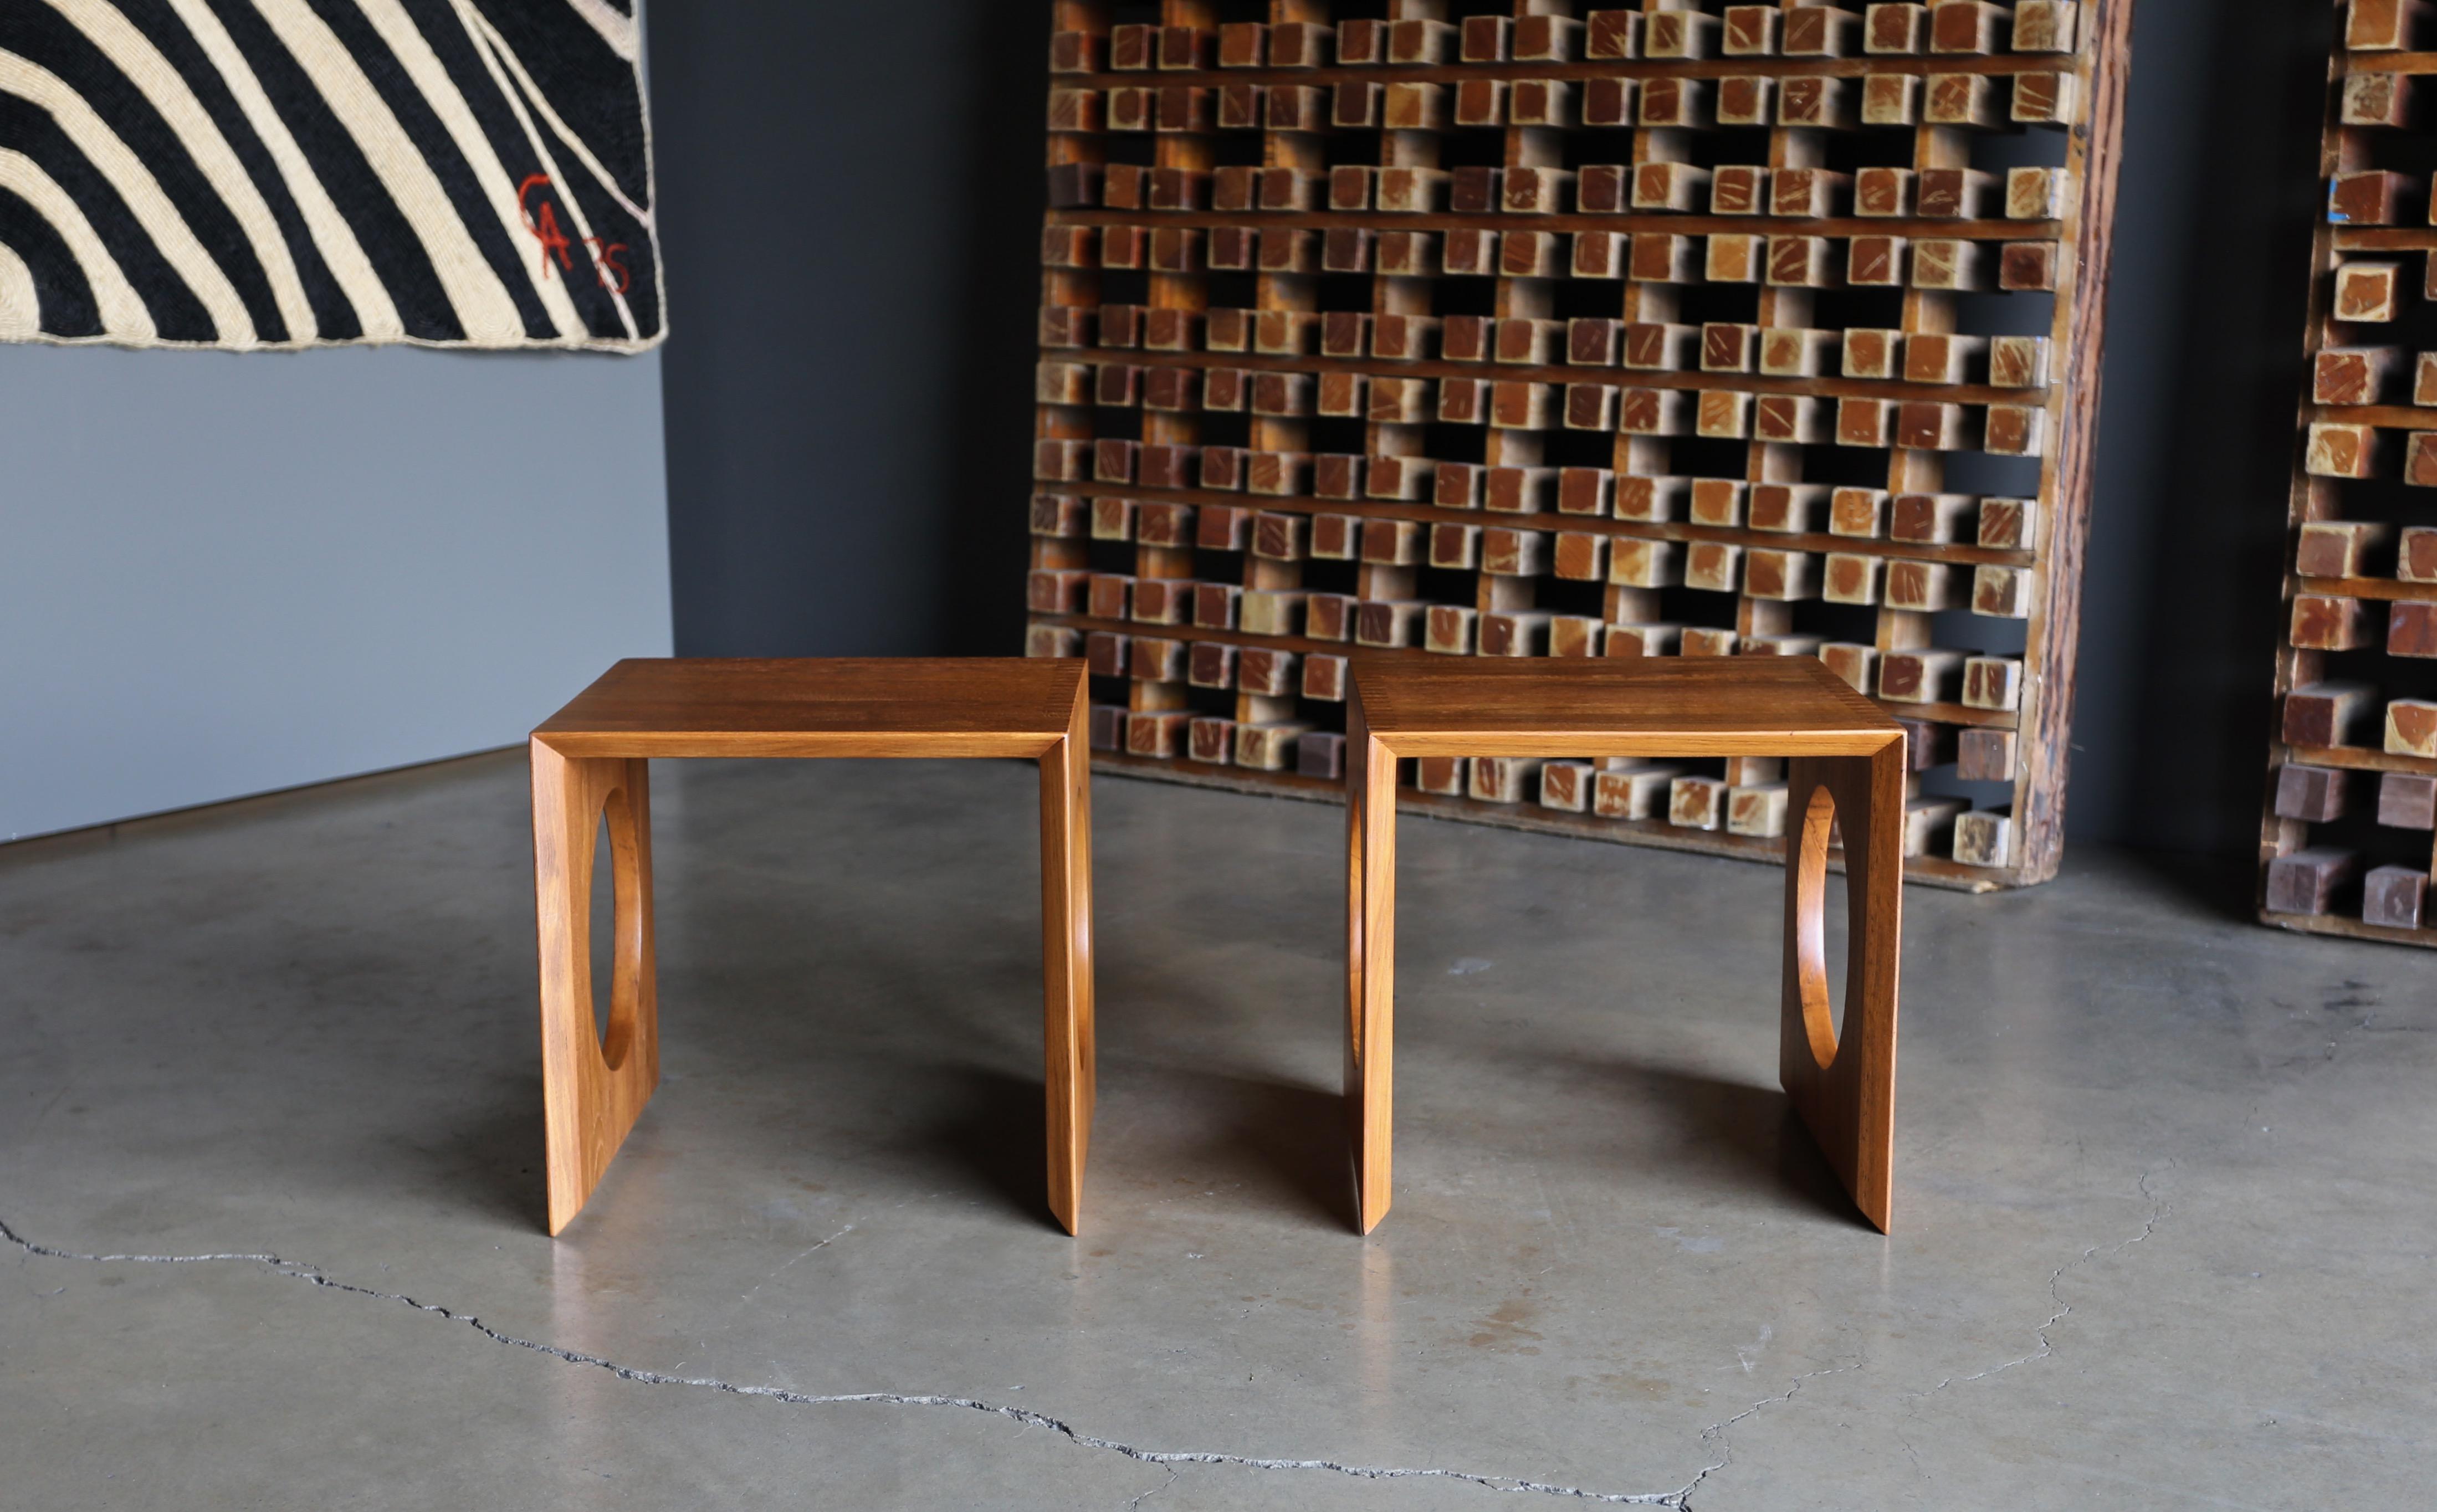 20th Century Jens Quistgaard Cube Occasional Tables for Richard Nissen, circa 1982